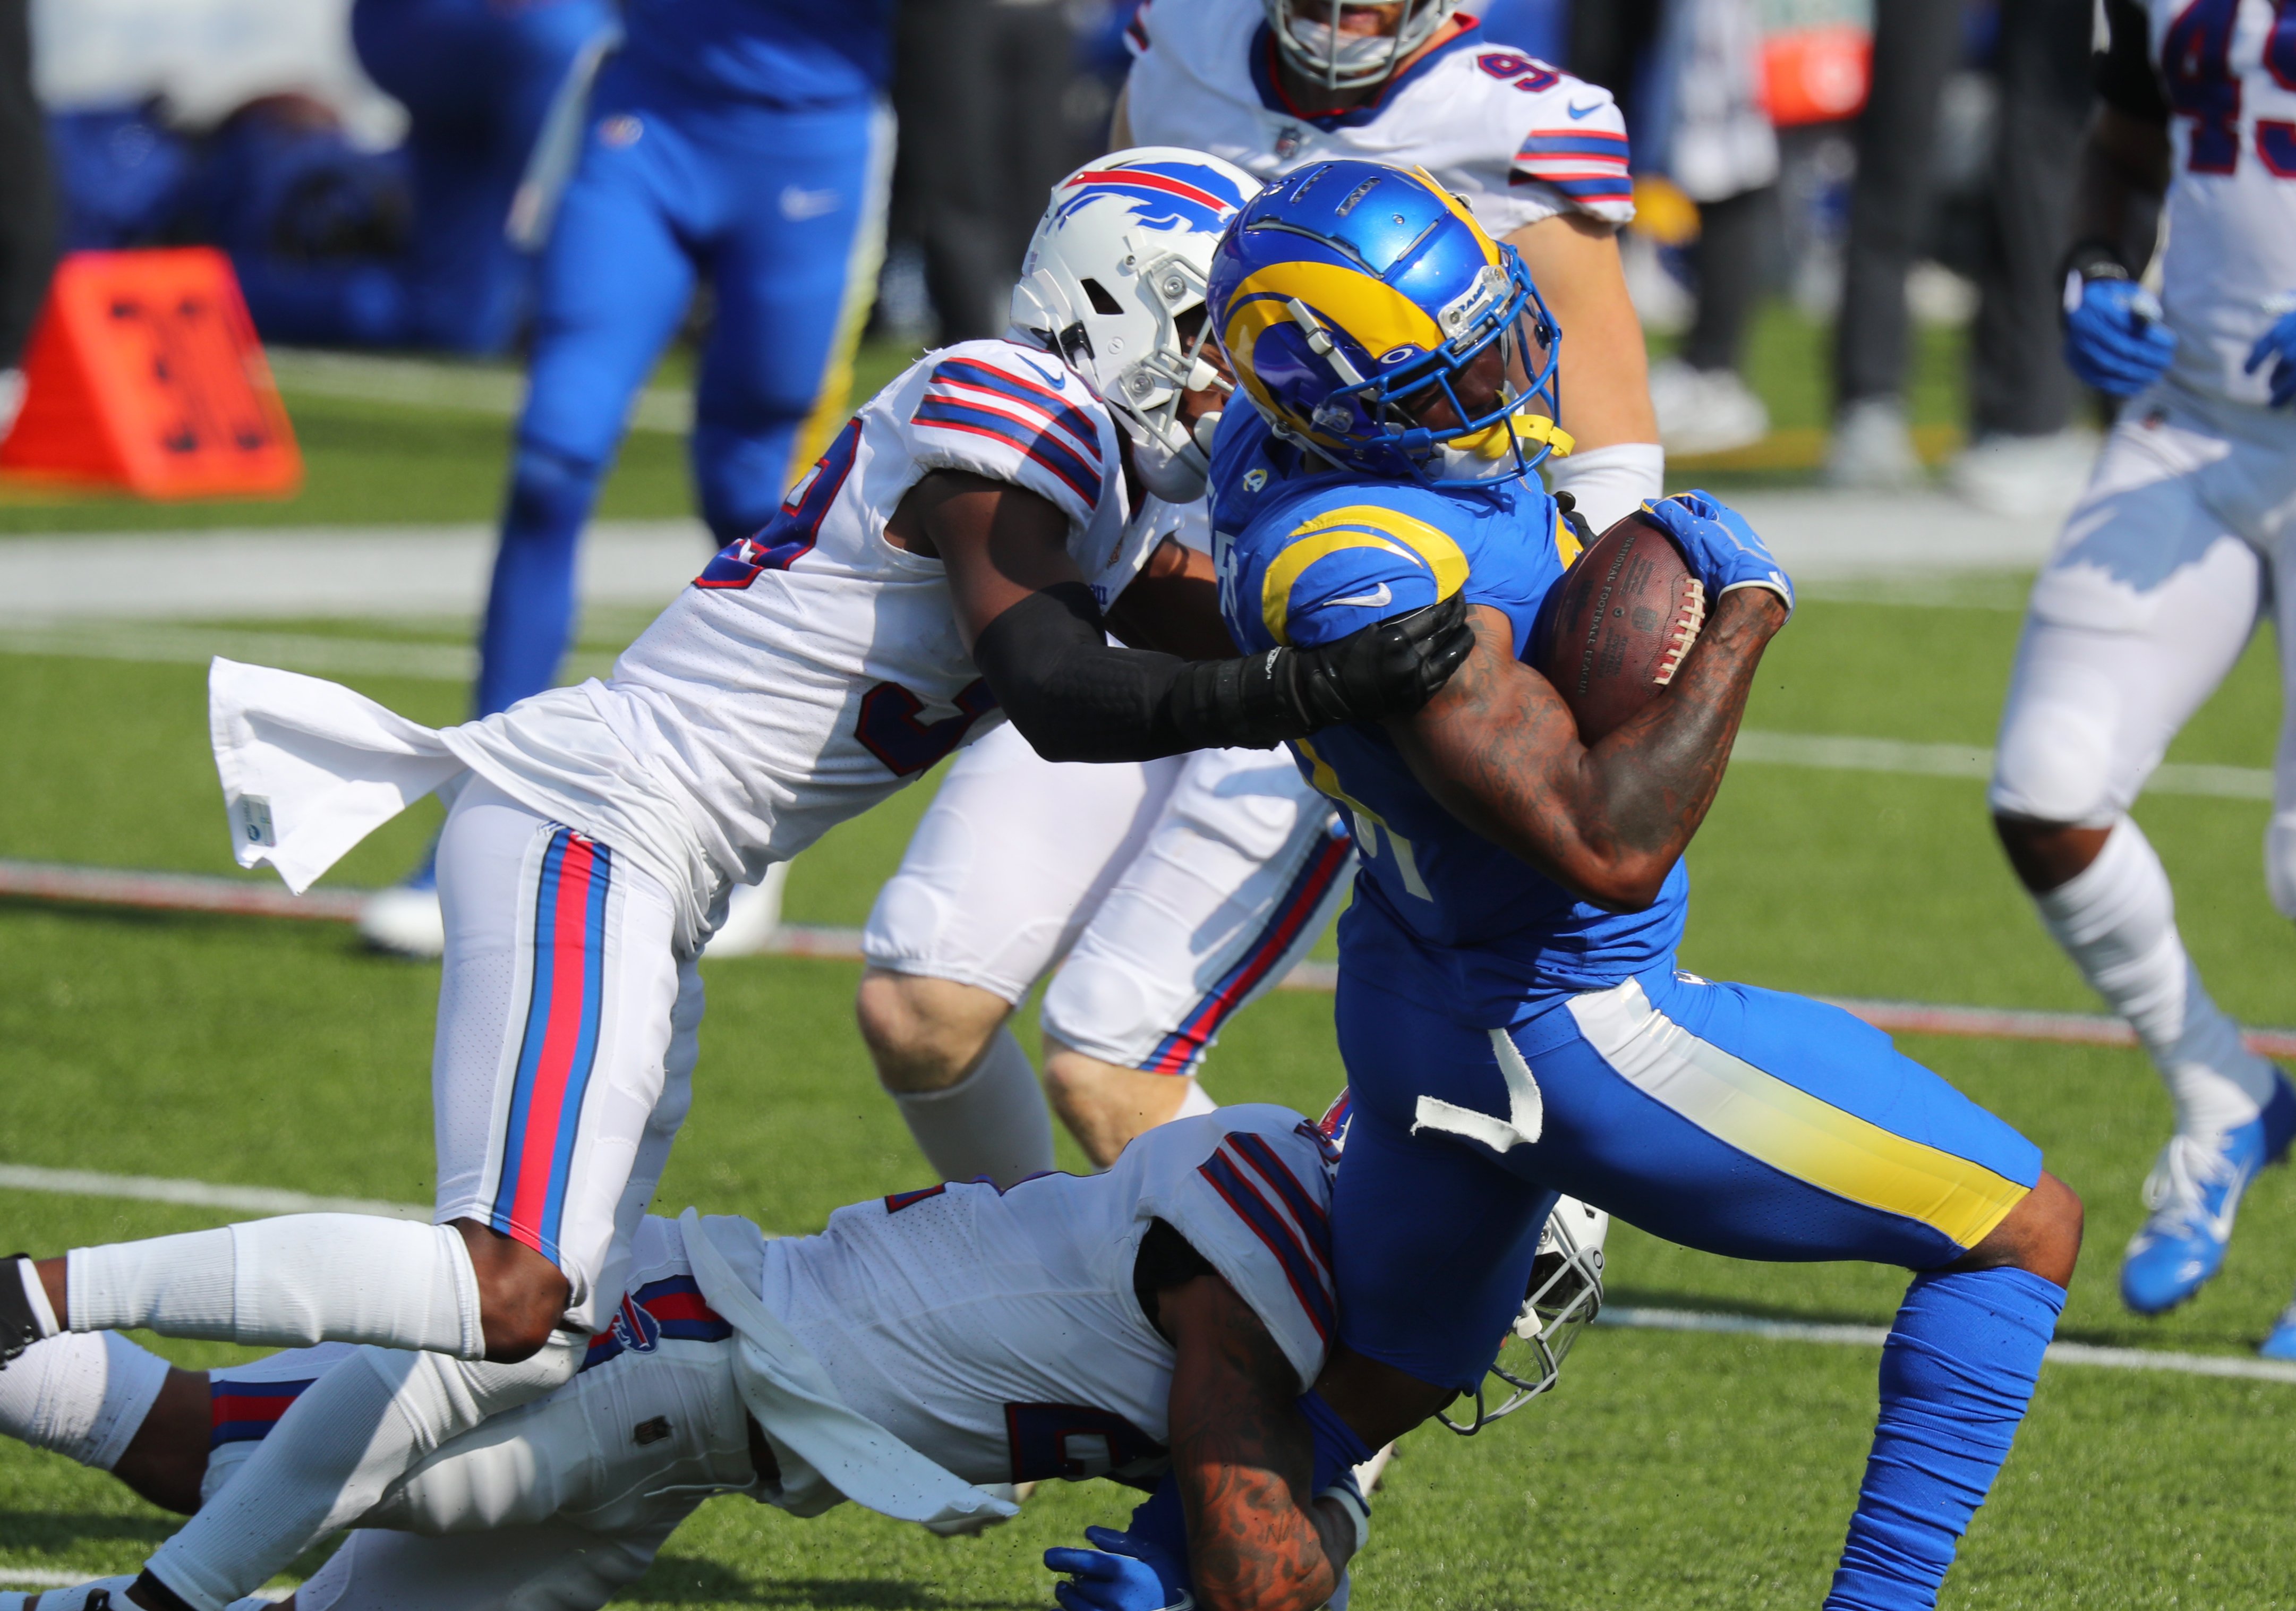 A Los Angeles Rams player is tackled by a Buffalo Bills player.